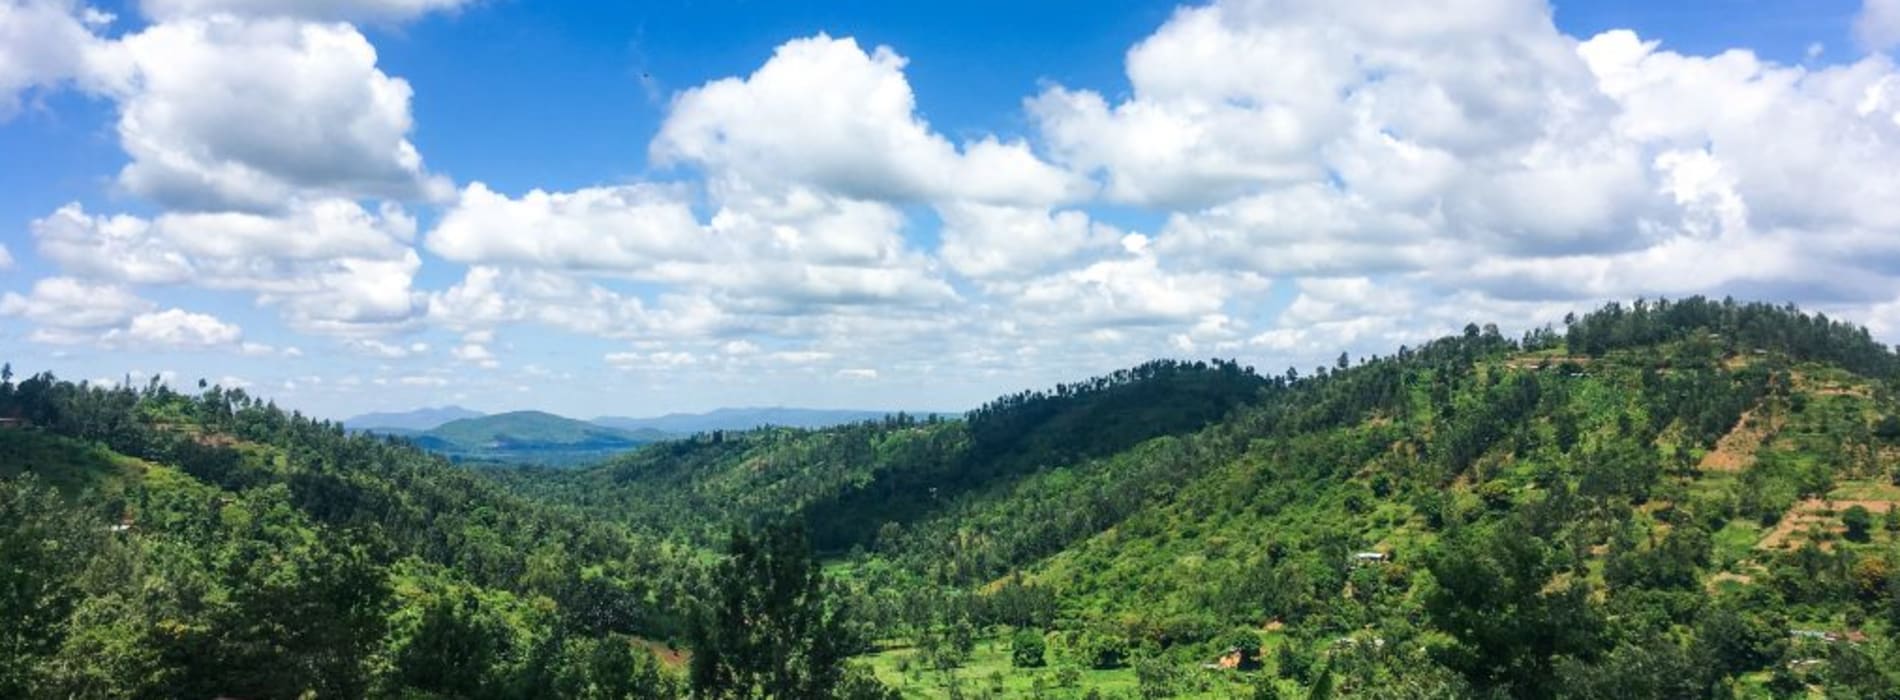 Landscape shot of hilly Kenyan countryside with blue skies and fluffy clouds.